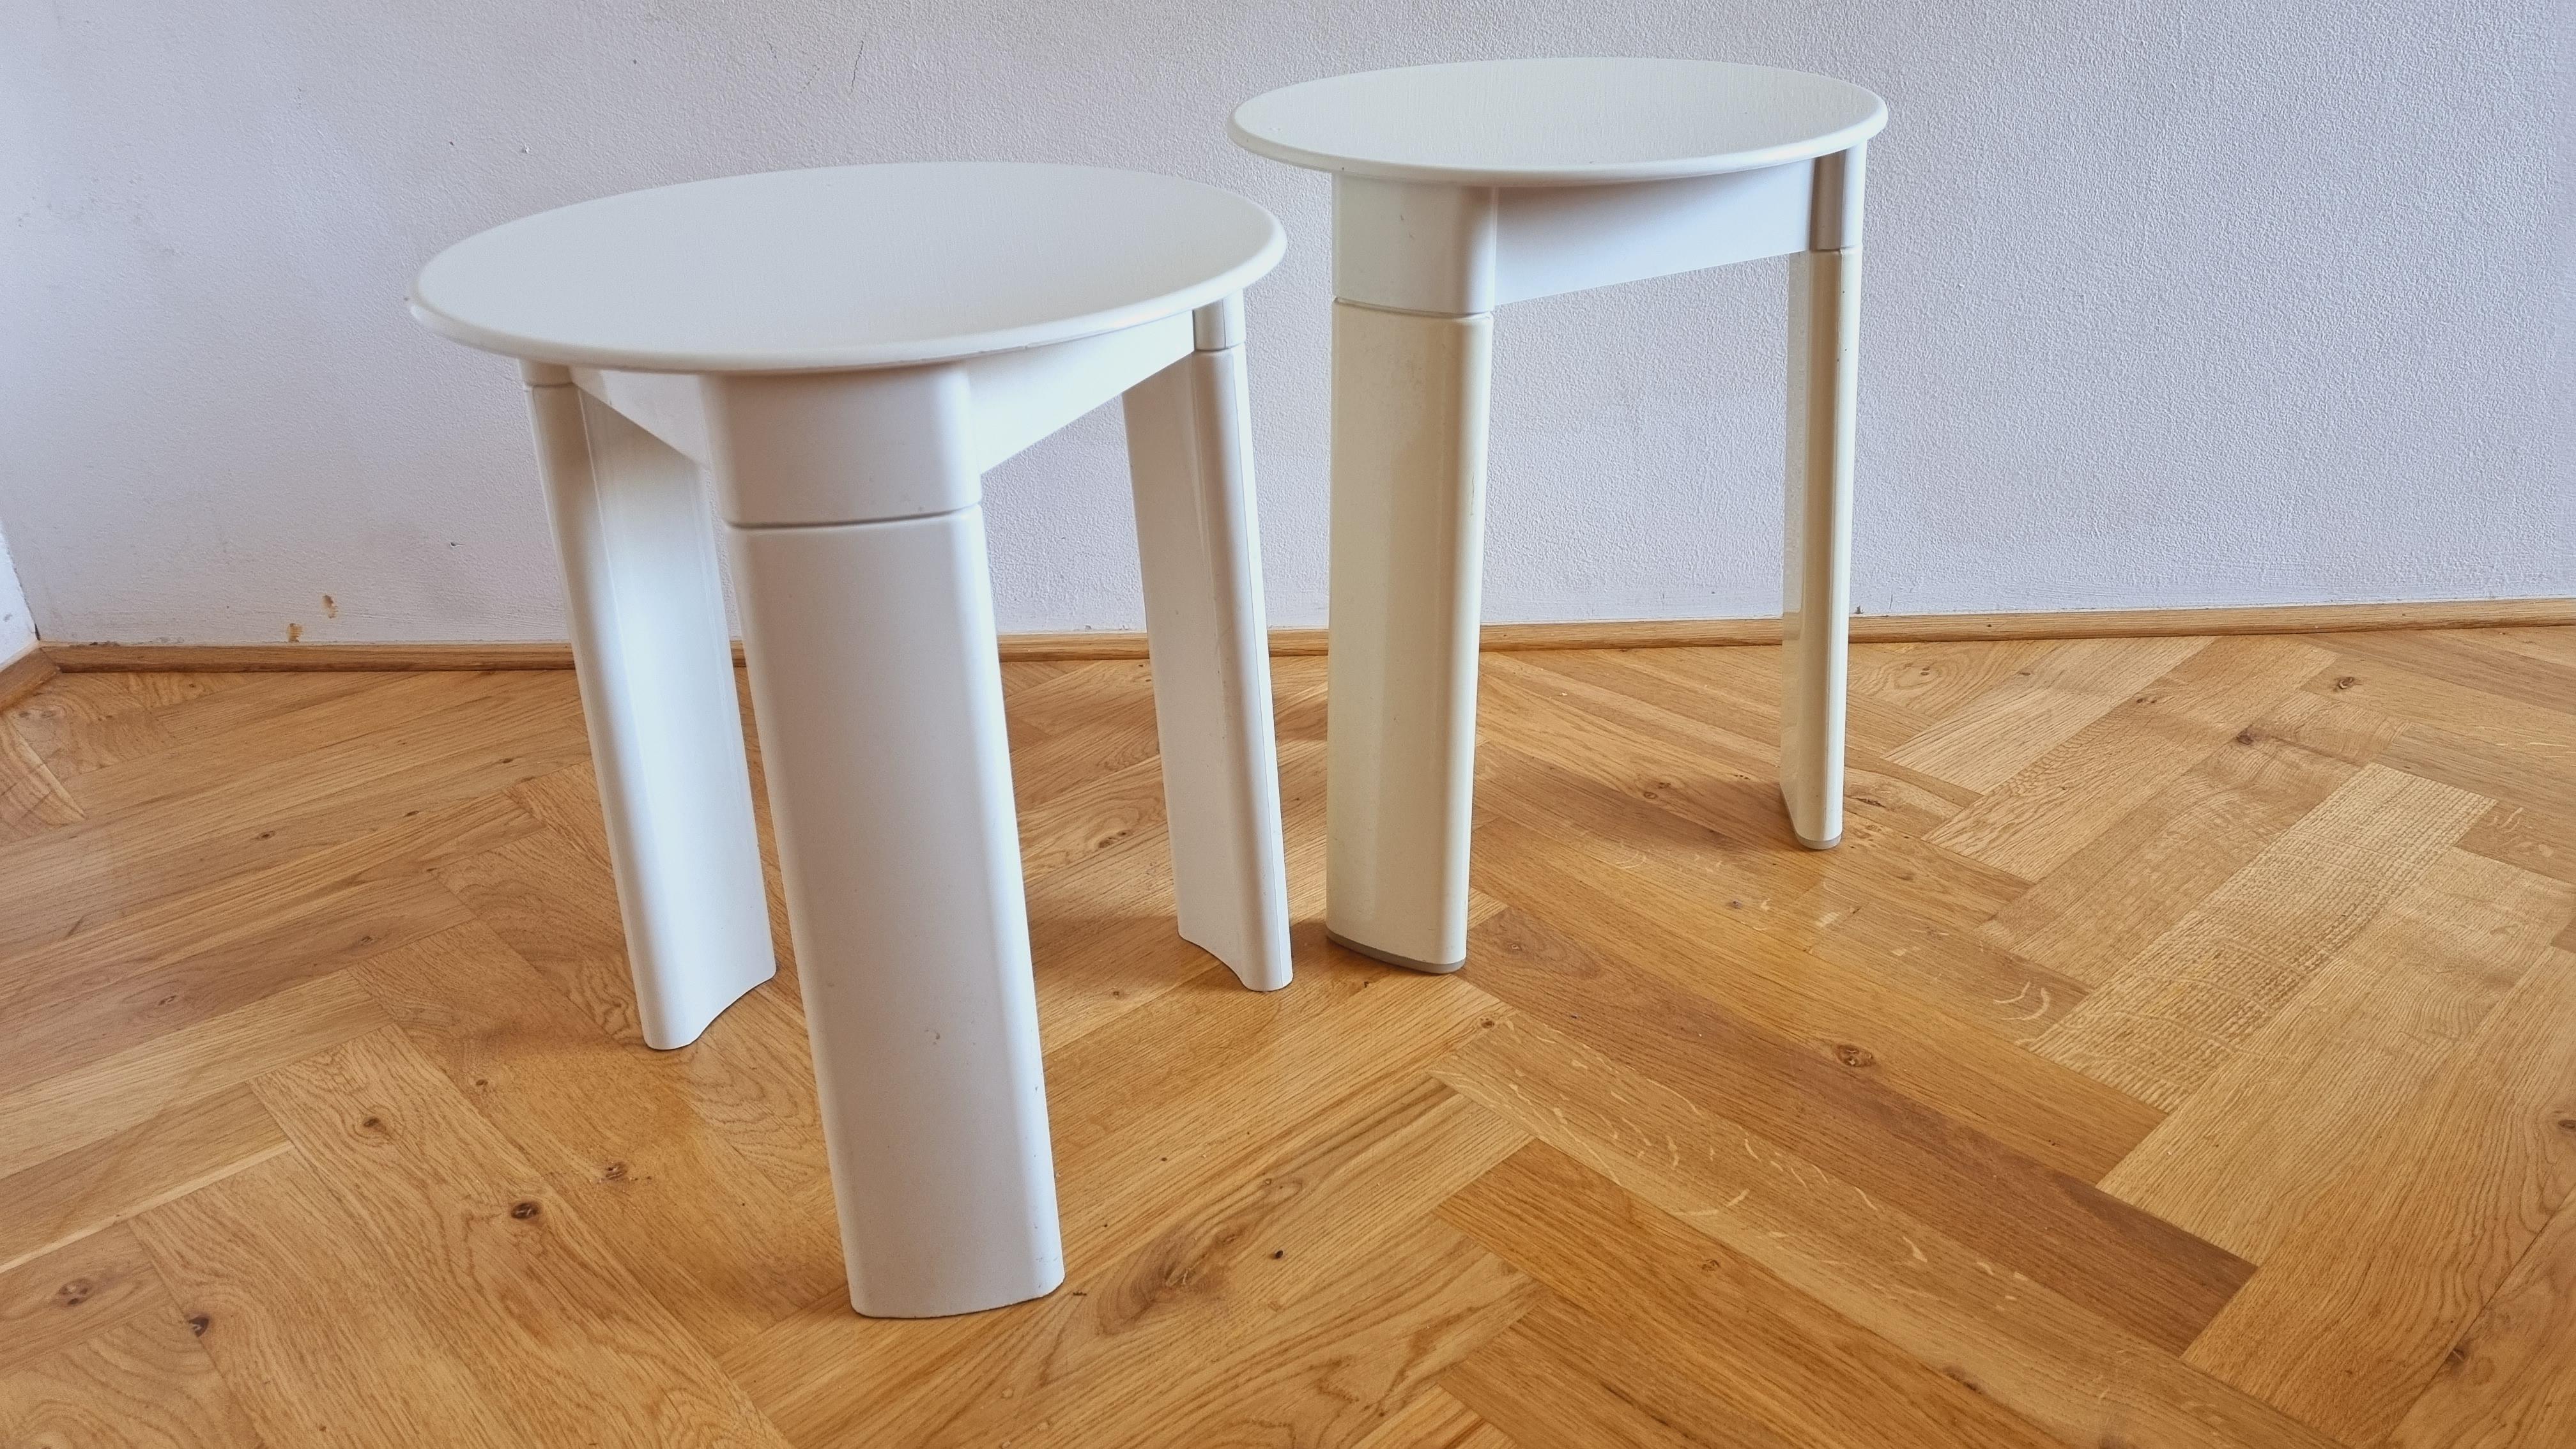 Late 20th Century Pair of Midcentury Stools or Side Tables Trio, Olaf Von Bohr, Gedy, Italy, 1970s For Sale